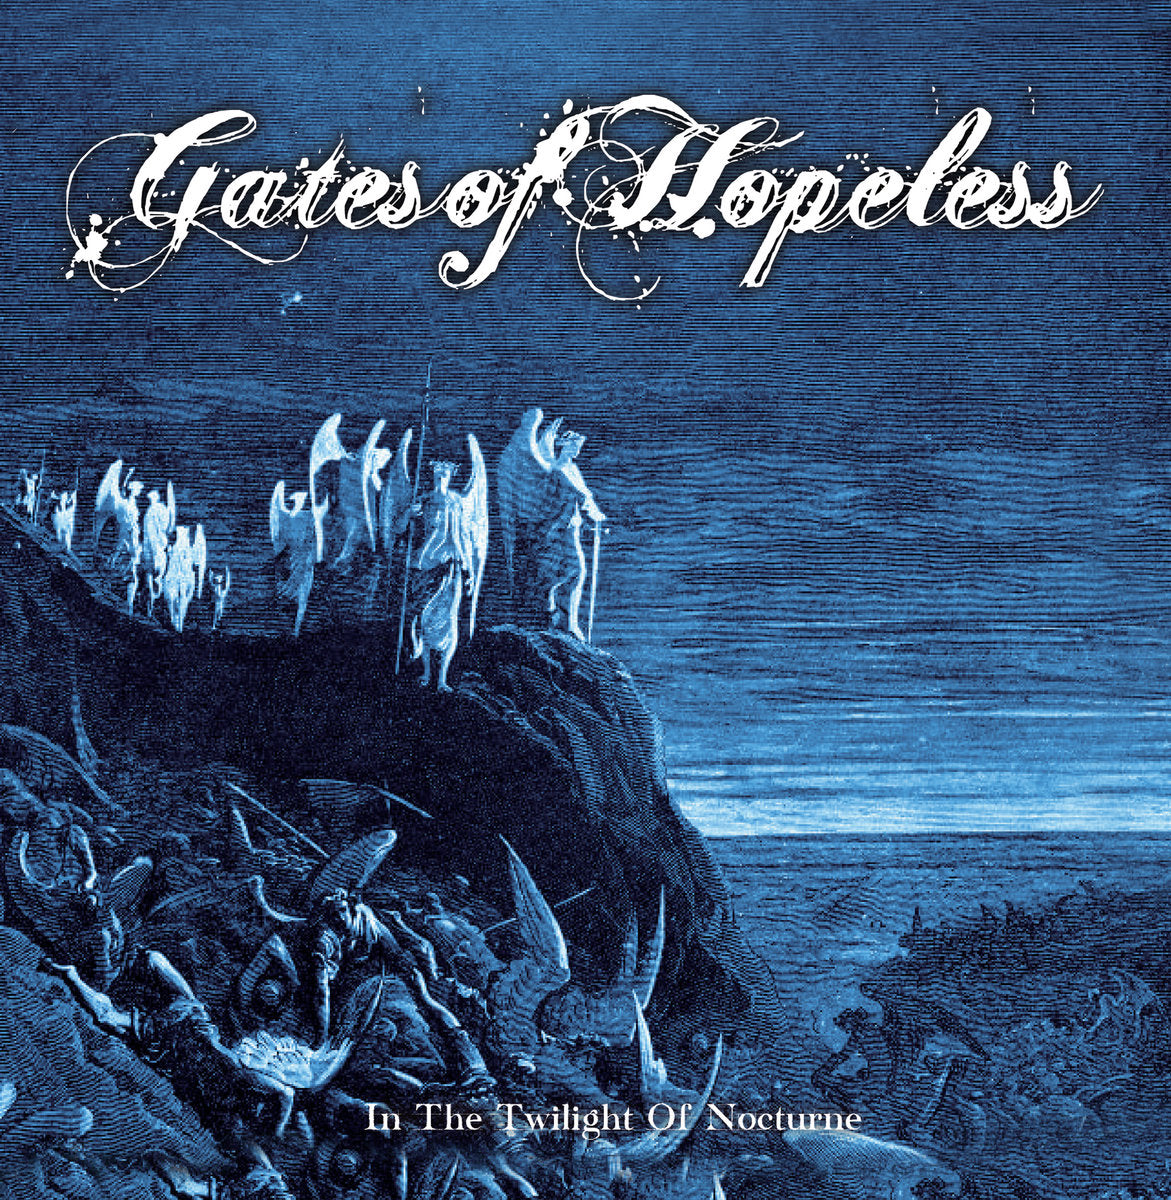 Gates Of Hopeless "In The Twilight Of Nocturne" CD